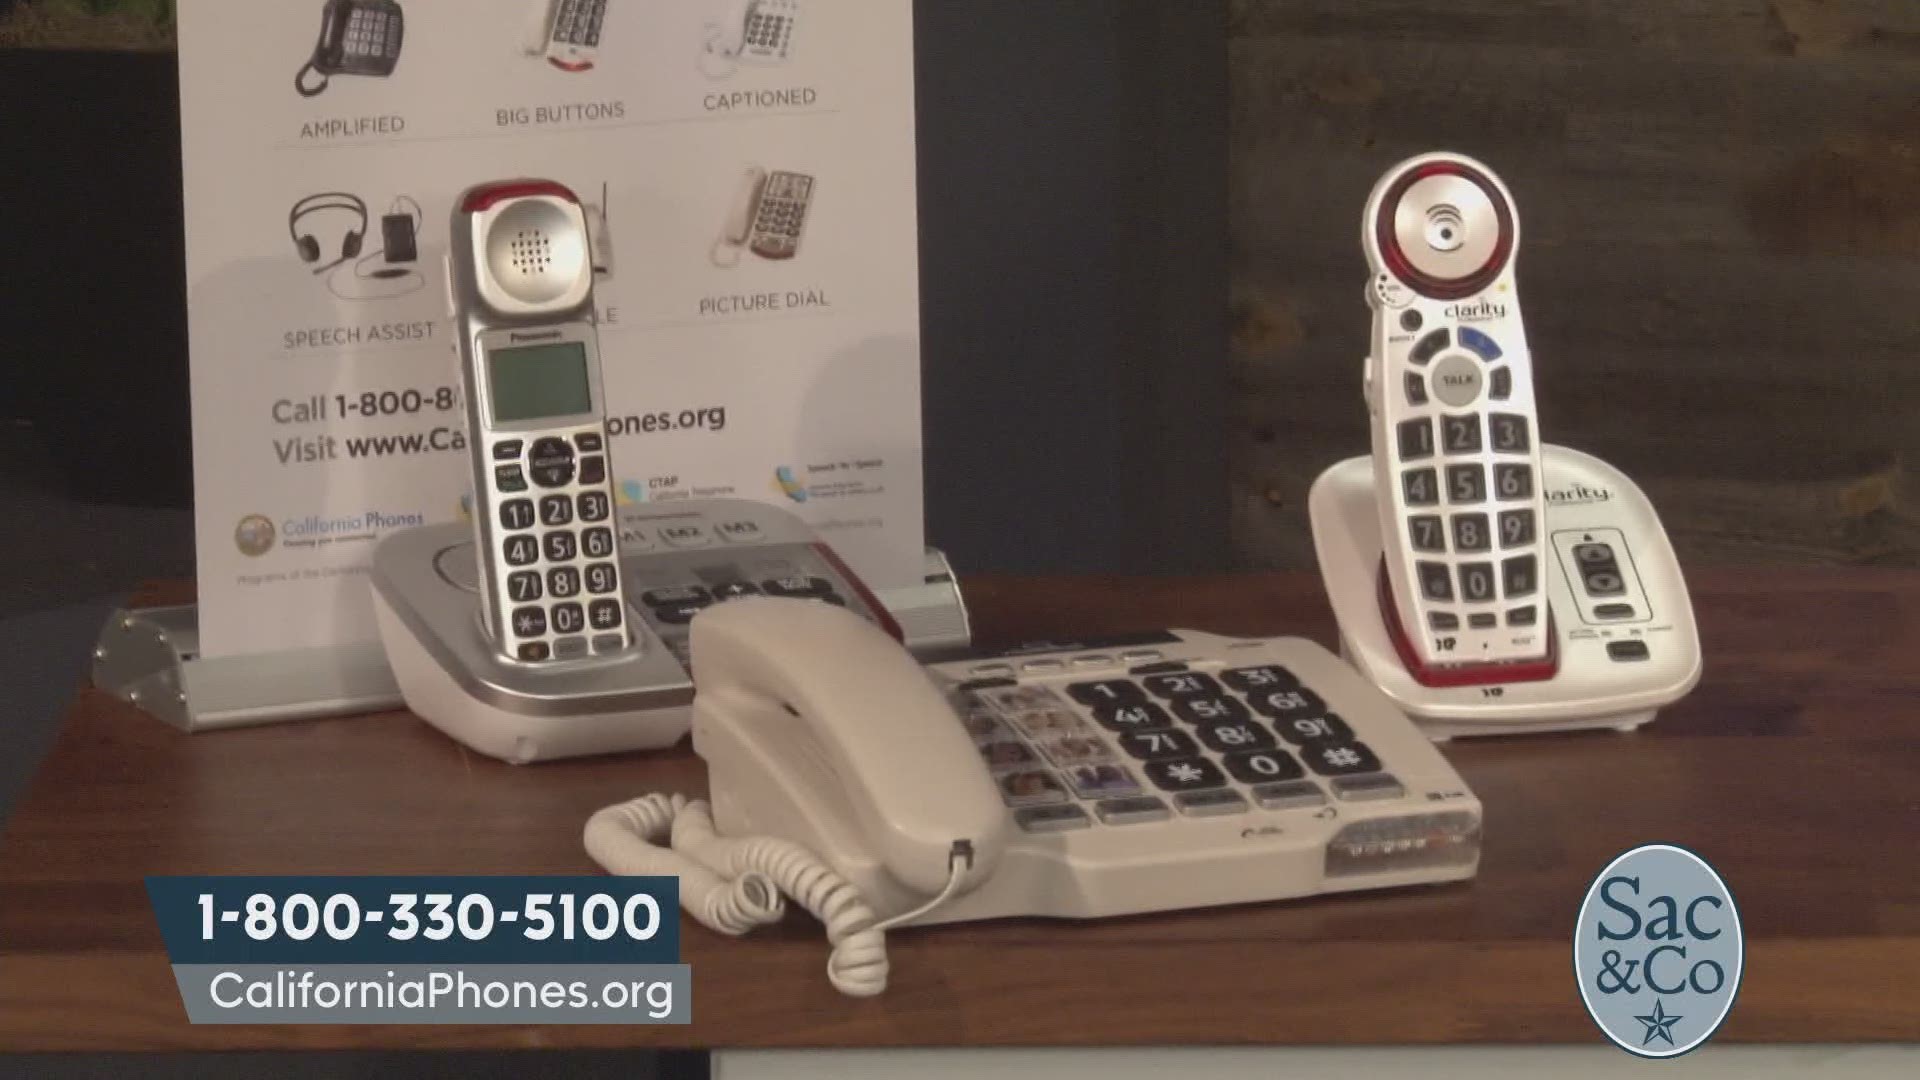 Learn how California Phones can help give access to those with disabilities, emergency and disaster notifications. California Phones is here keeping you connected! The following is a paid segment sponsored by California Phones.